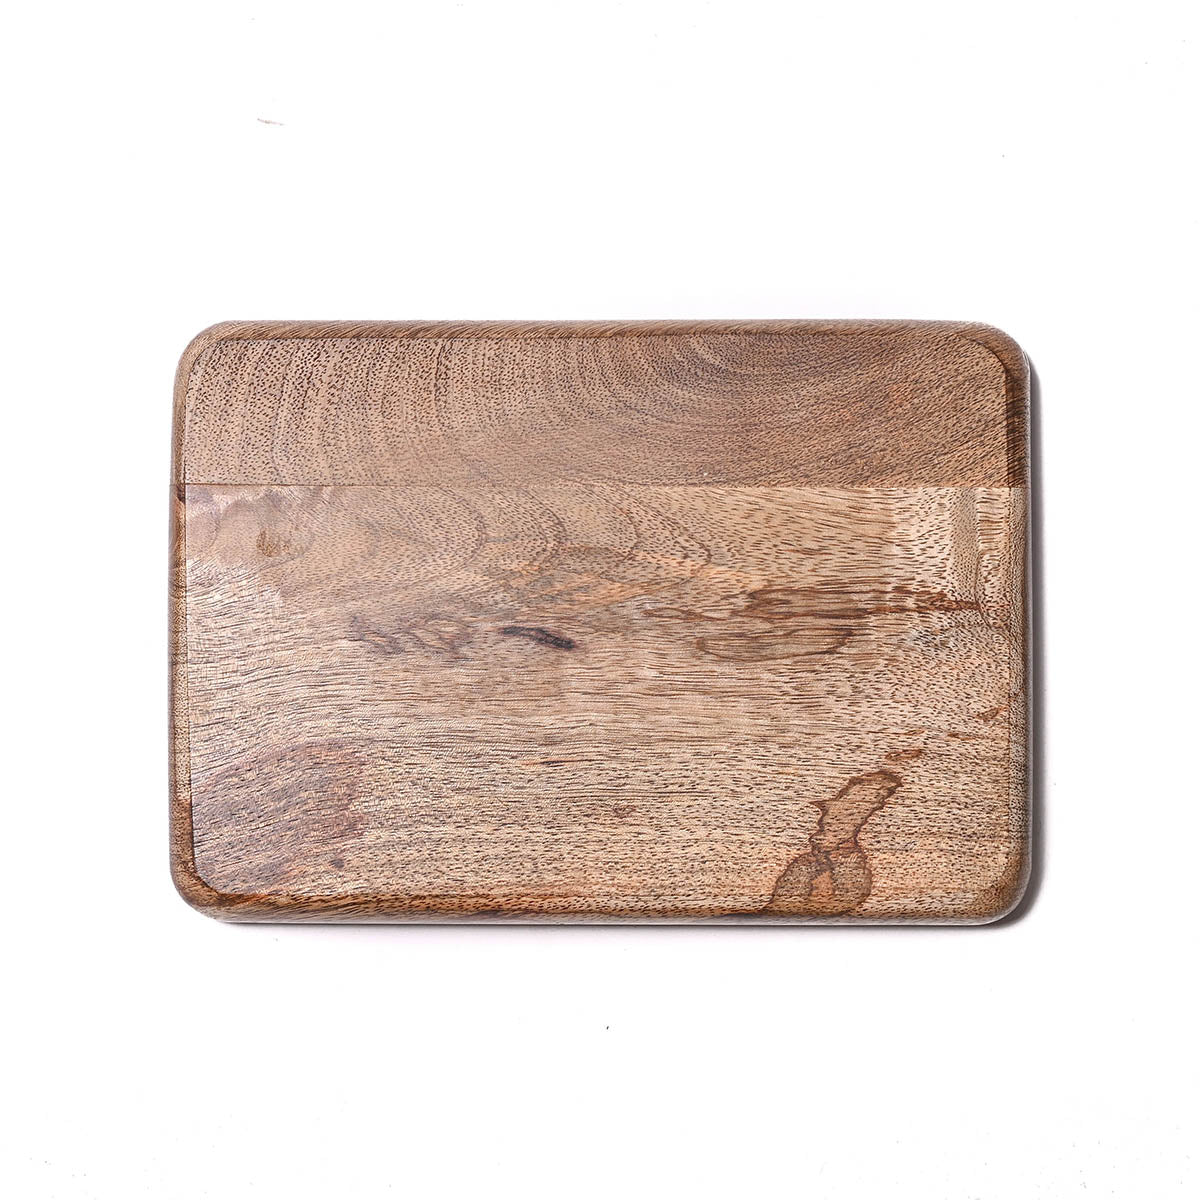 Small wooden tray, round edged rustic serving tray, farmhouse decor, 5X7 inches